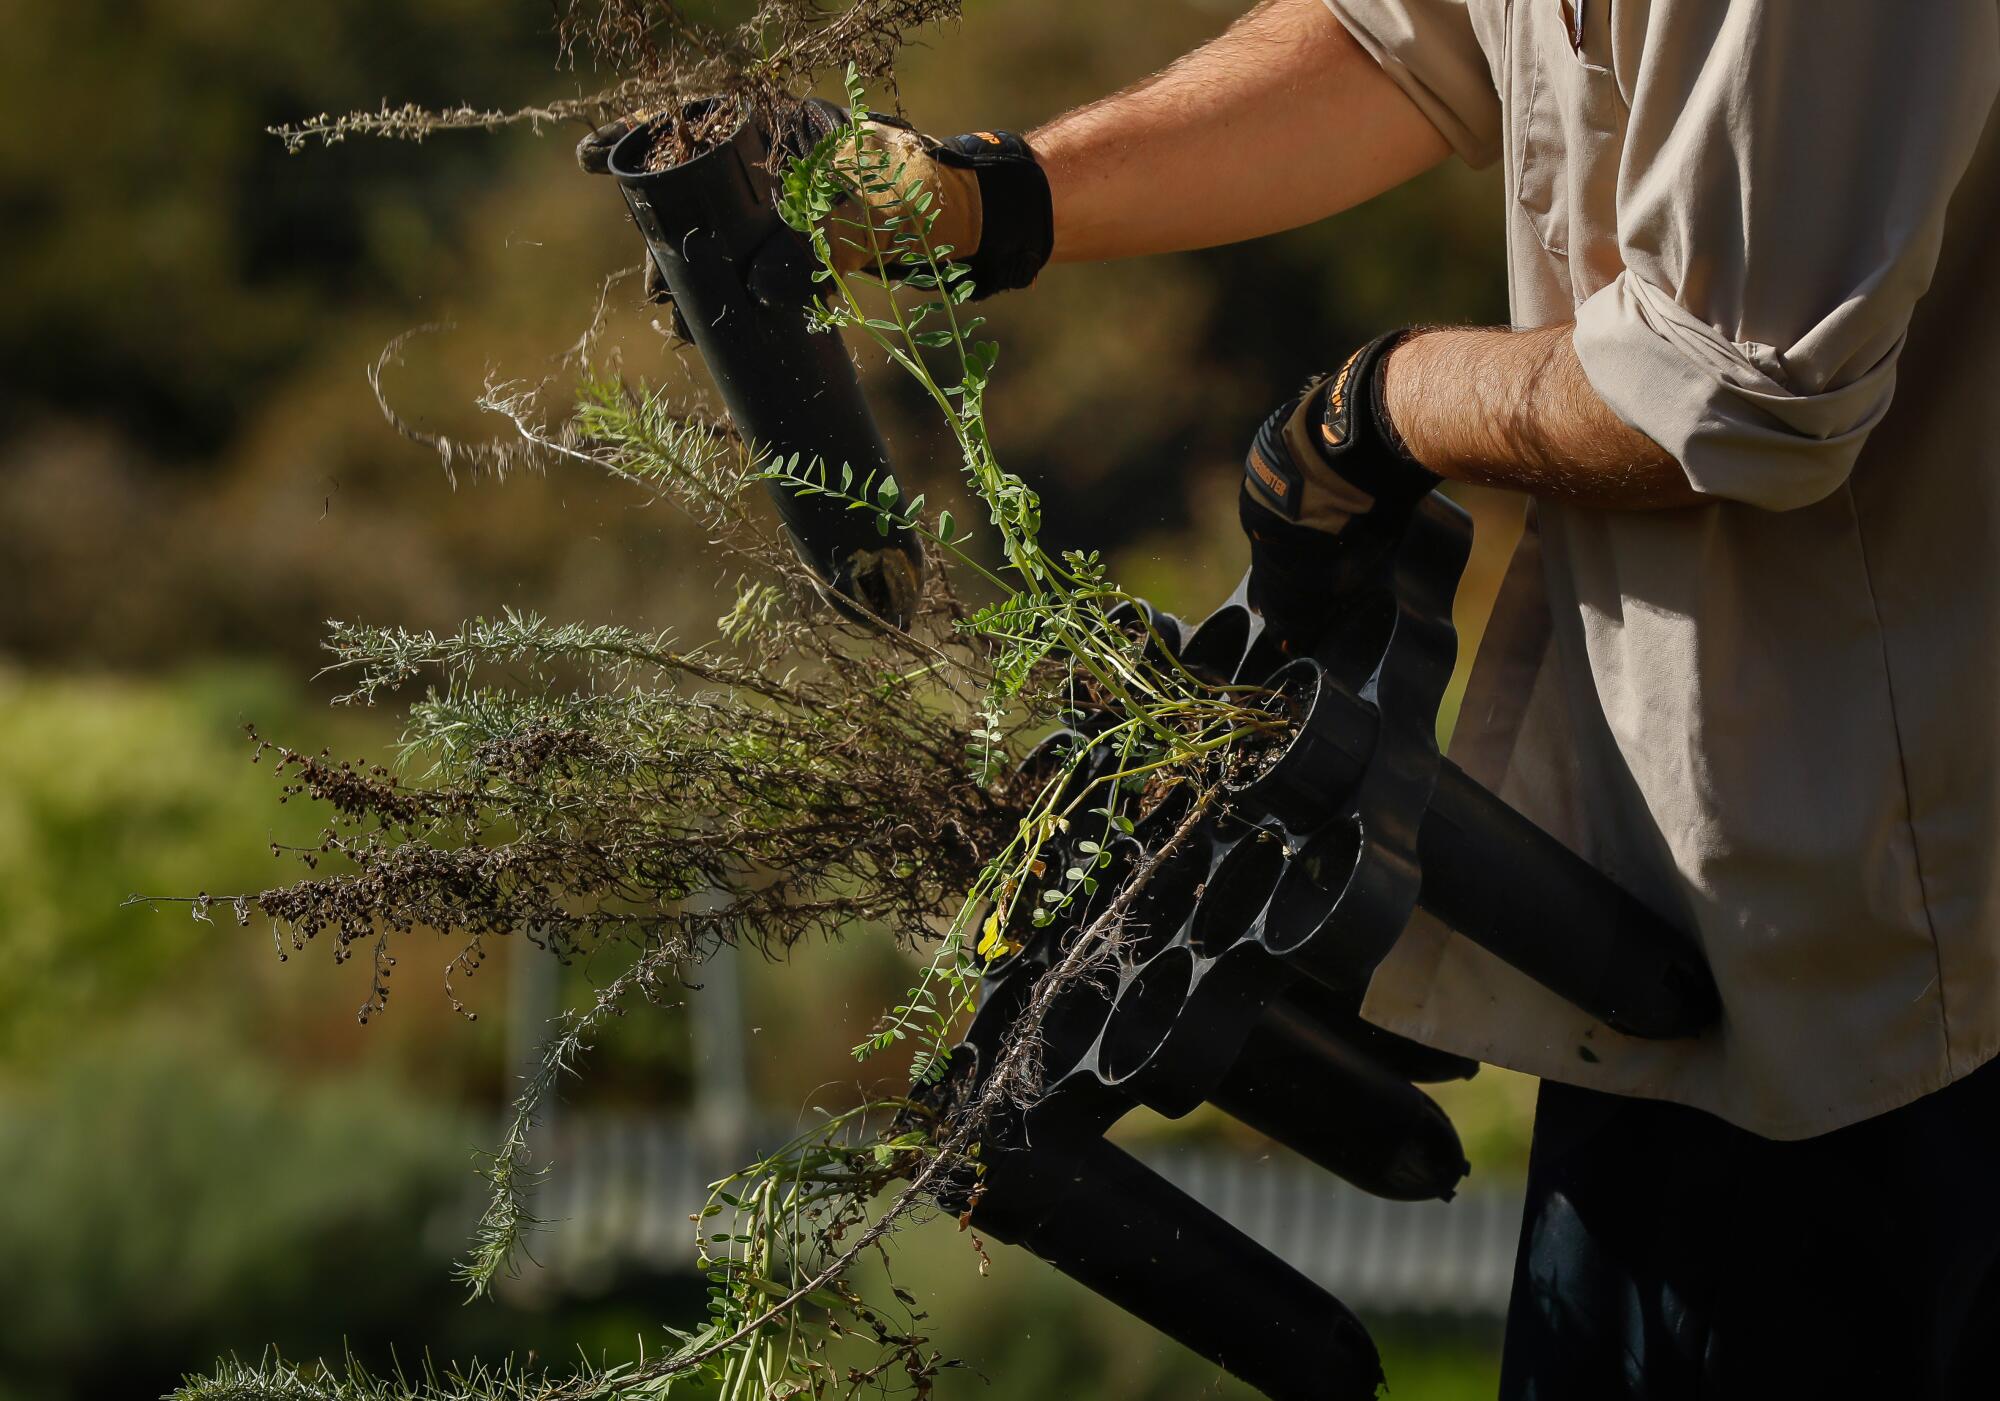 A close-up of a pair of hands taking plants out of a plastic pot